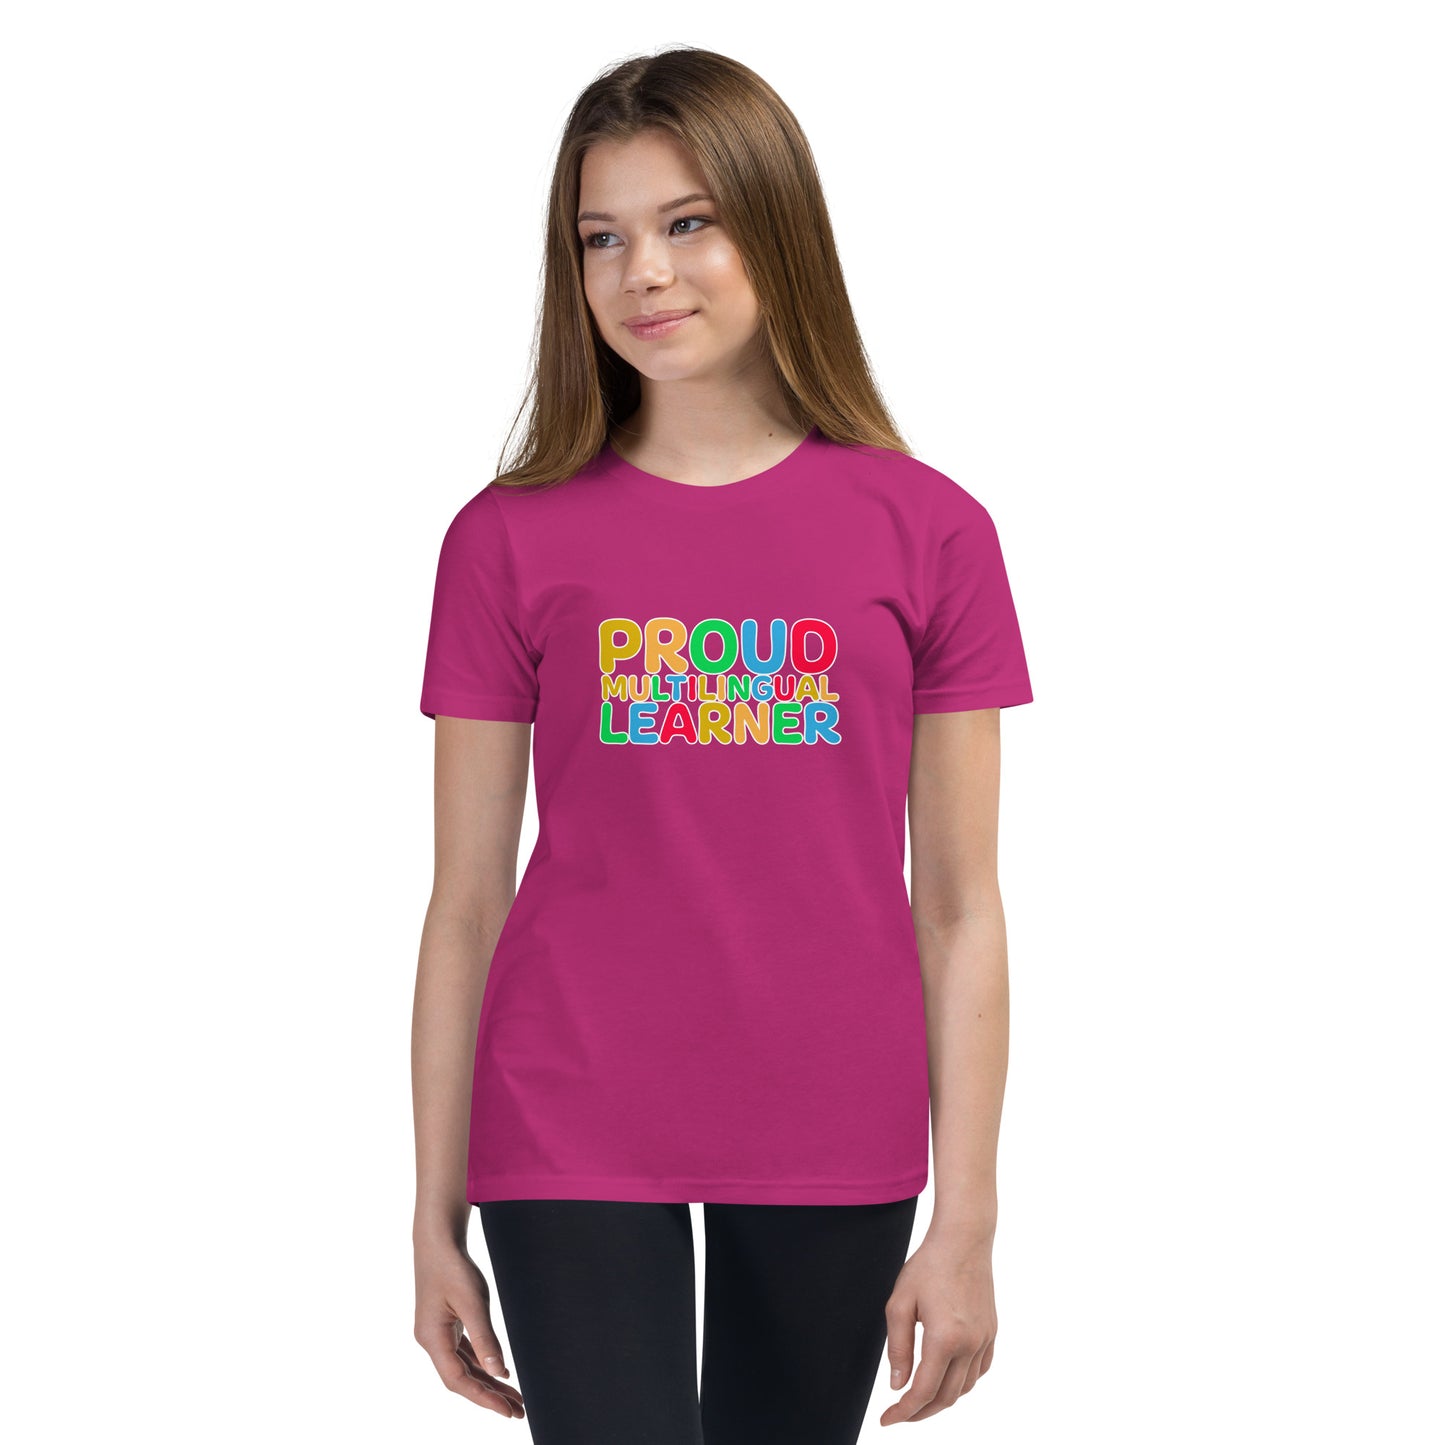 Multilingual Learner Youth Short Sleeve T-Shirt.